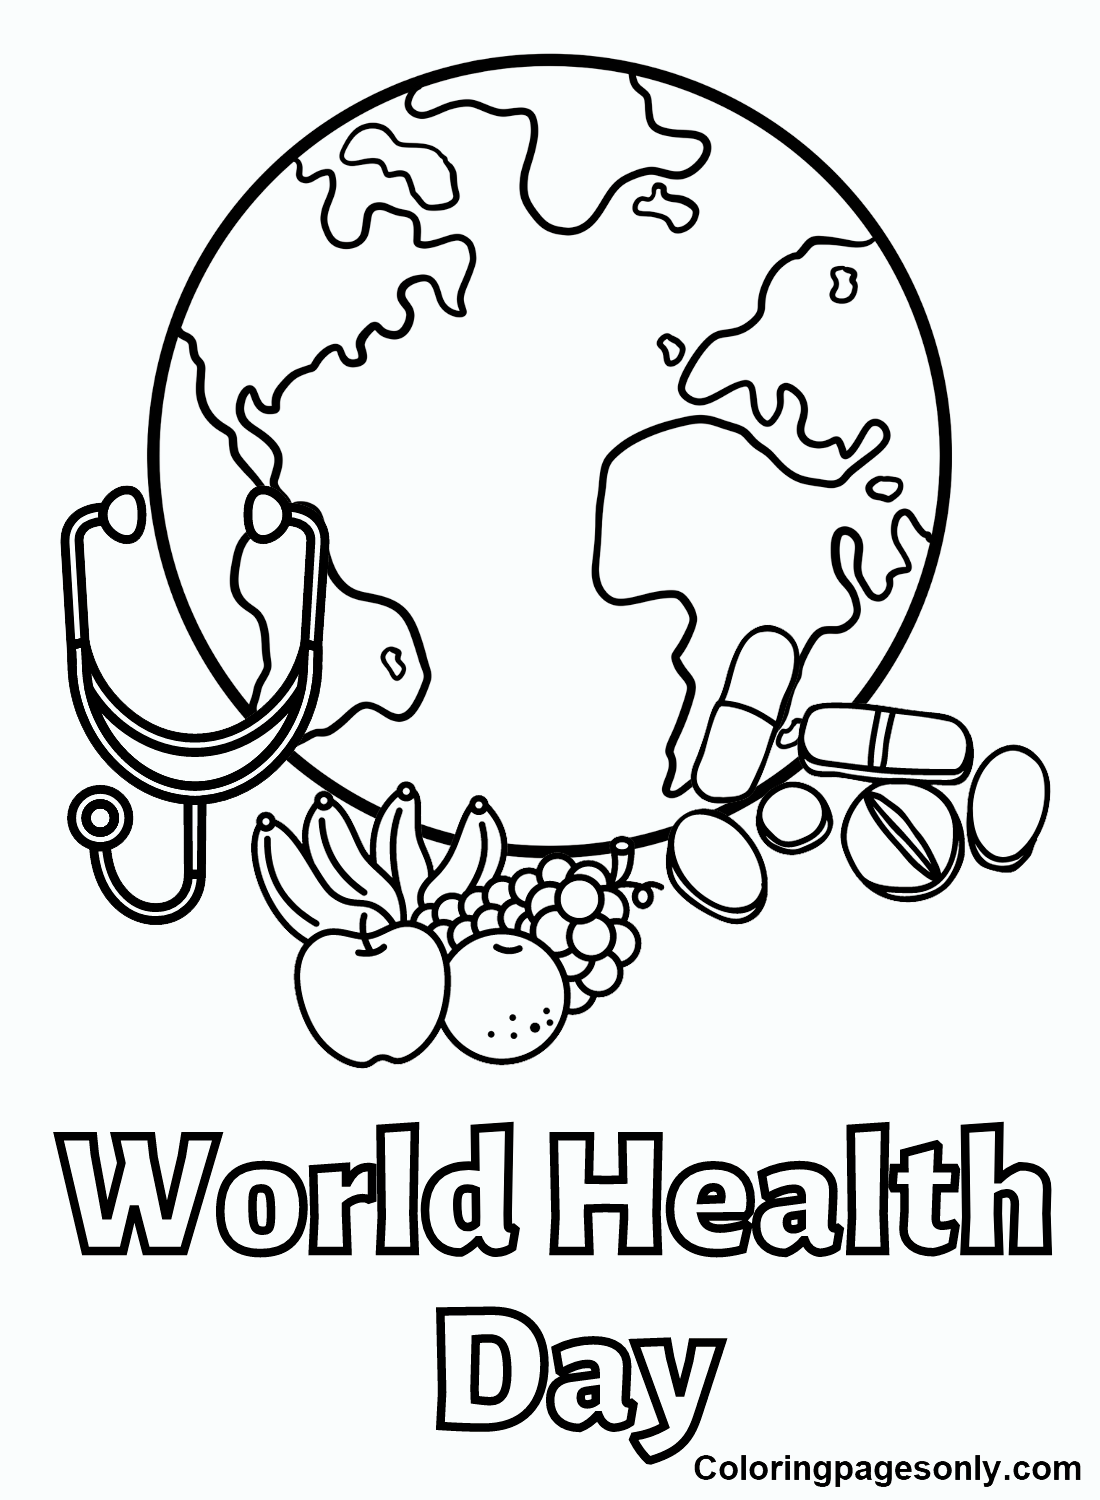 World health day card elements. Stock Vector by ©ring-ring 101947958